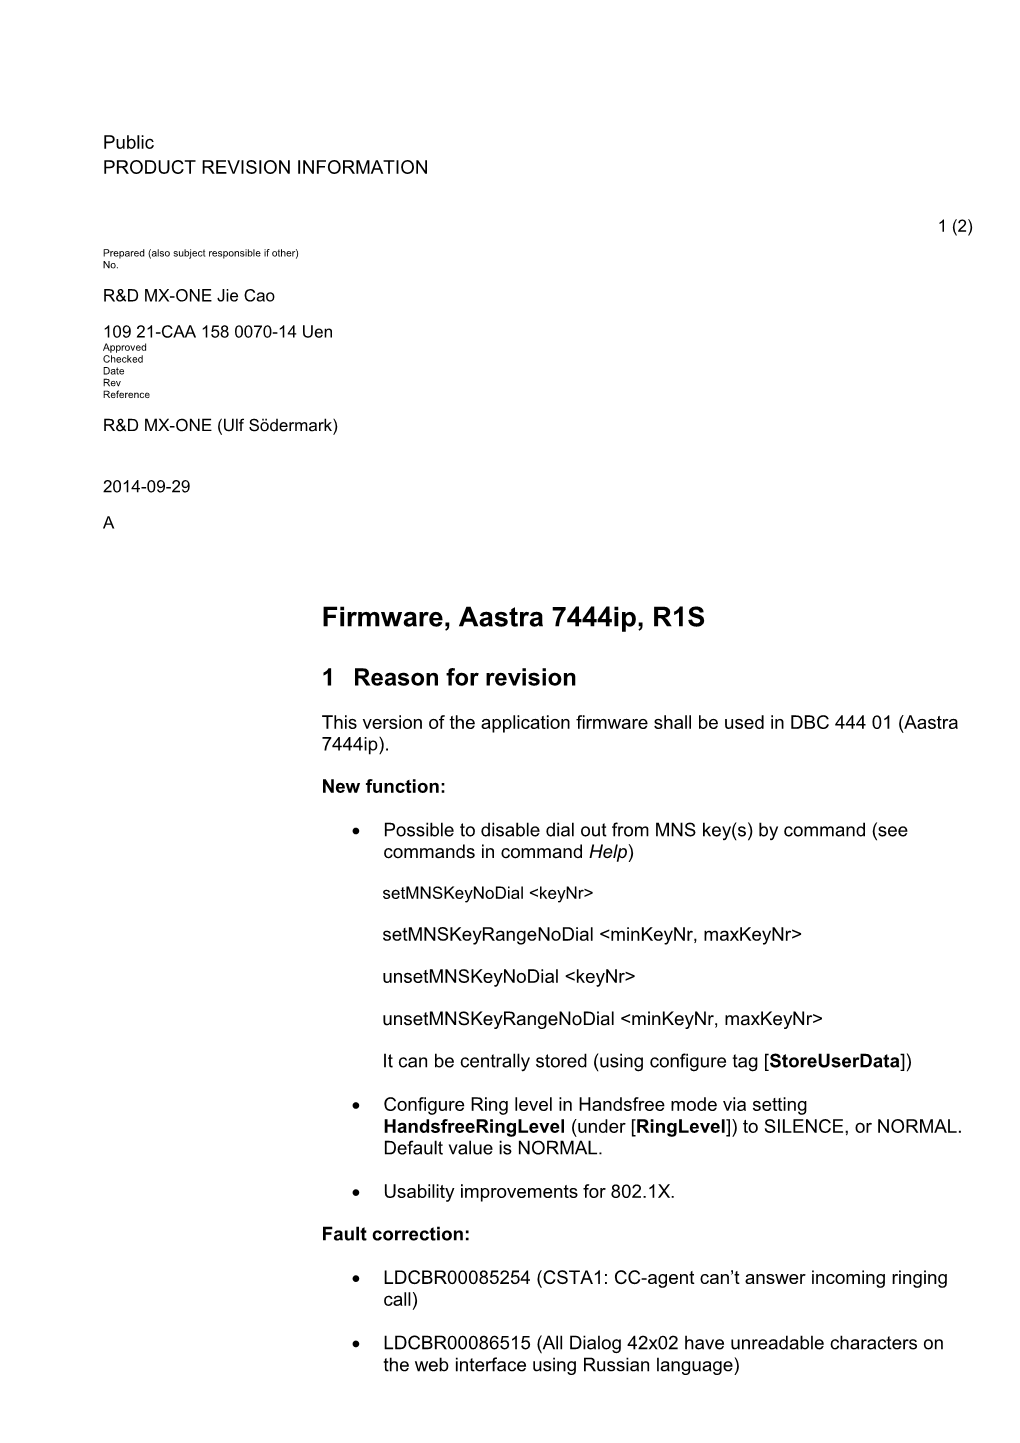 Firmware, Aastra 7444Ip, R1S